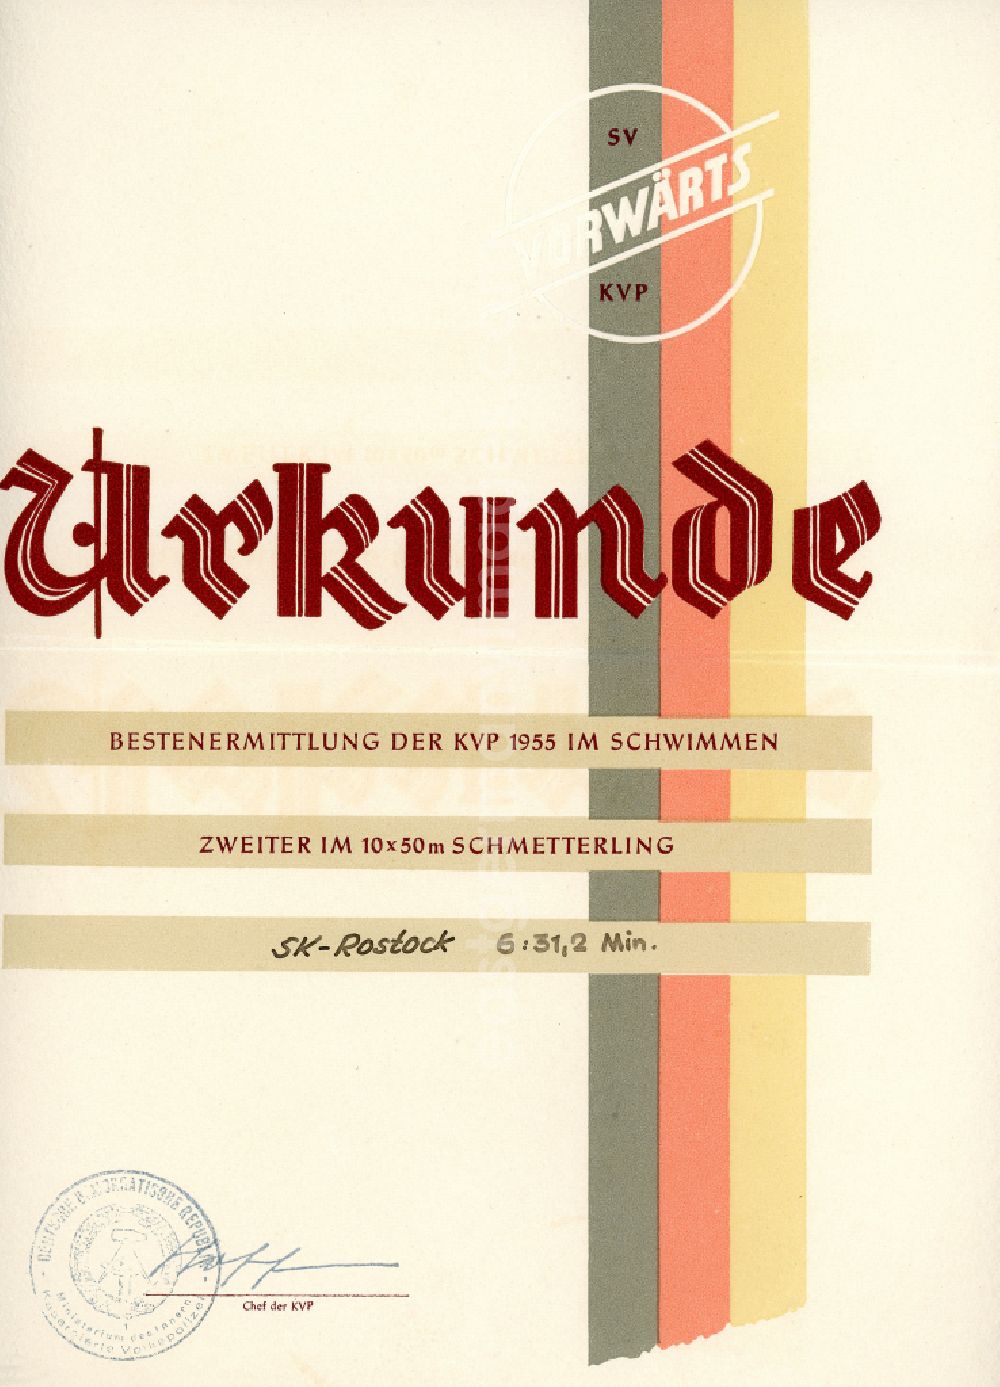 GDR picture archive: Stralsund - Reproduction Certificate Swimming competition of the KVP Barracked People's Police Lake issued in Stralsund in the federal state of Mecklenburg-Western Pomerania on the territory of the former GDR, German Democratic Republic